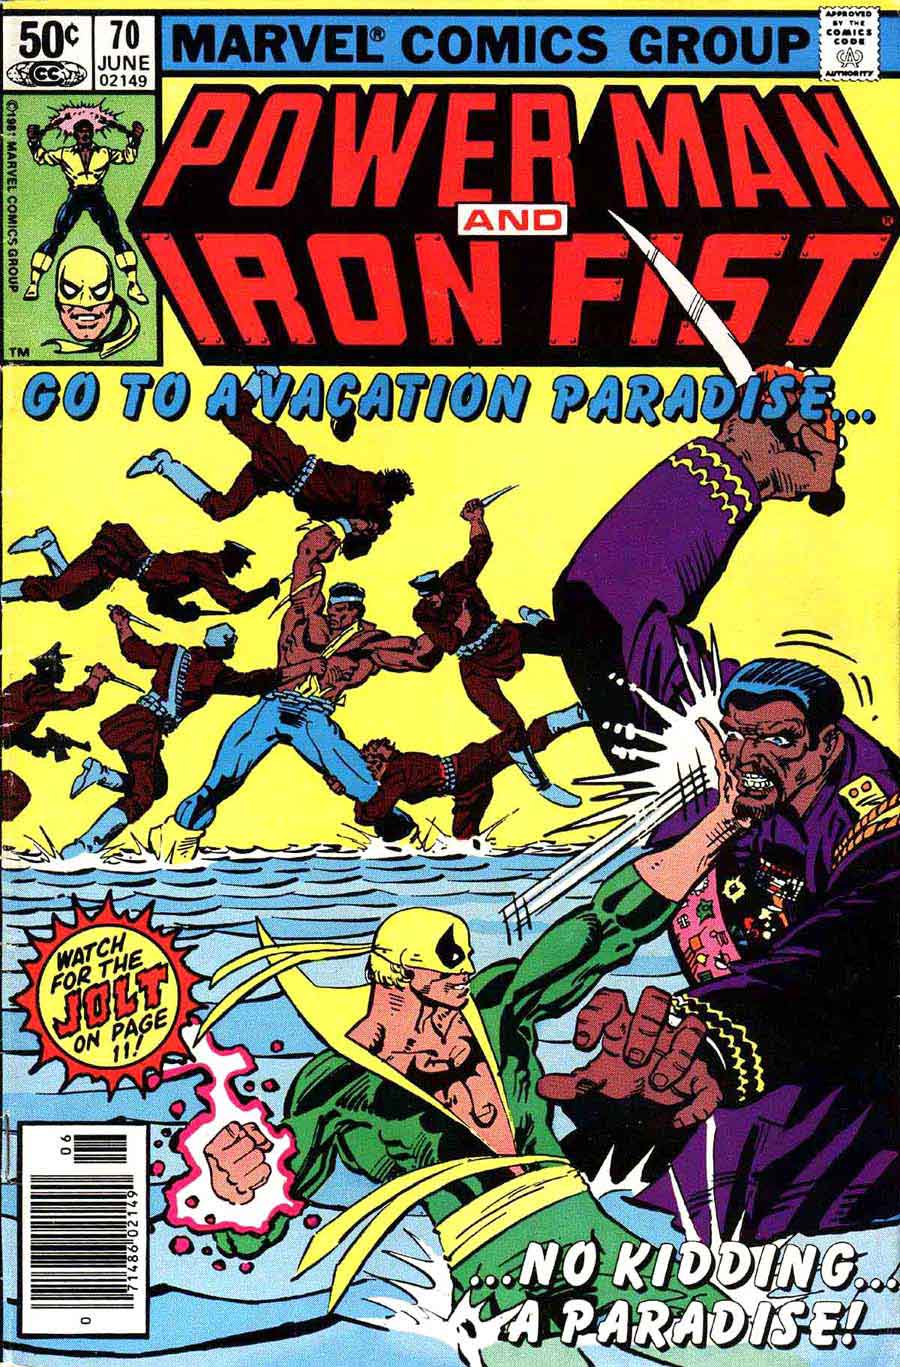 Power Man and Iron Fist #70 marvel 1980s comic book cover art by Frank Miller